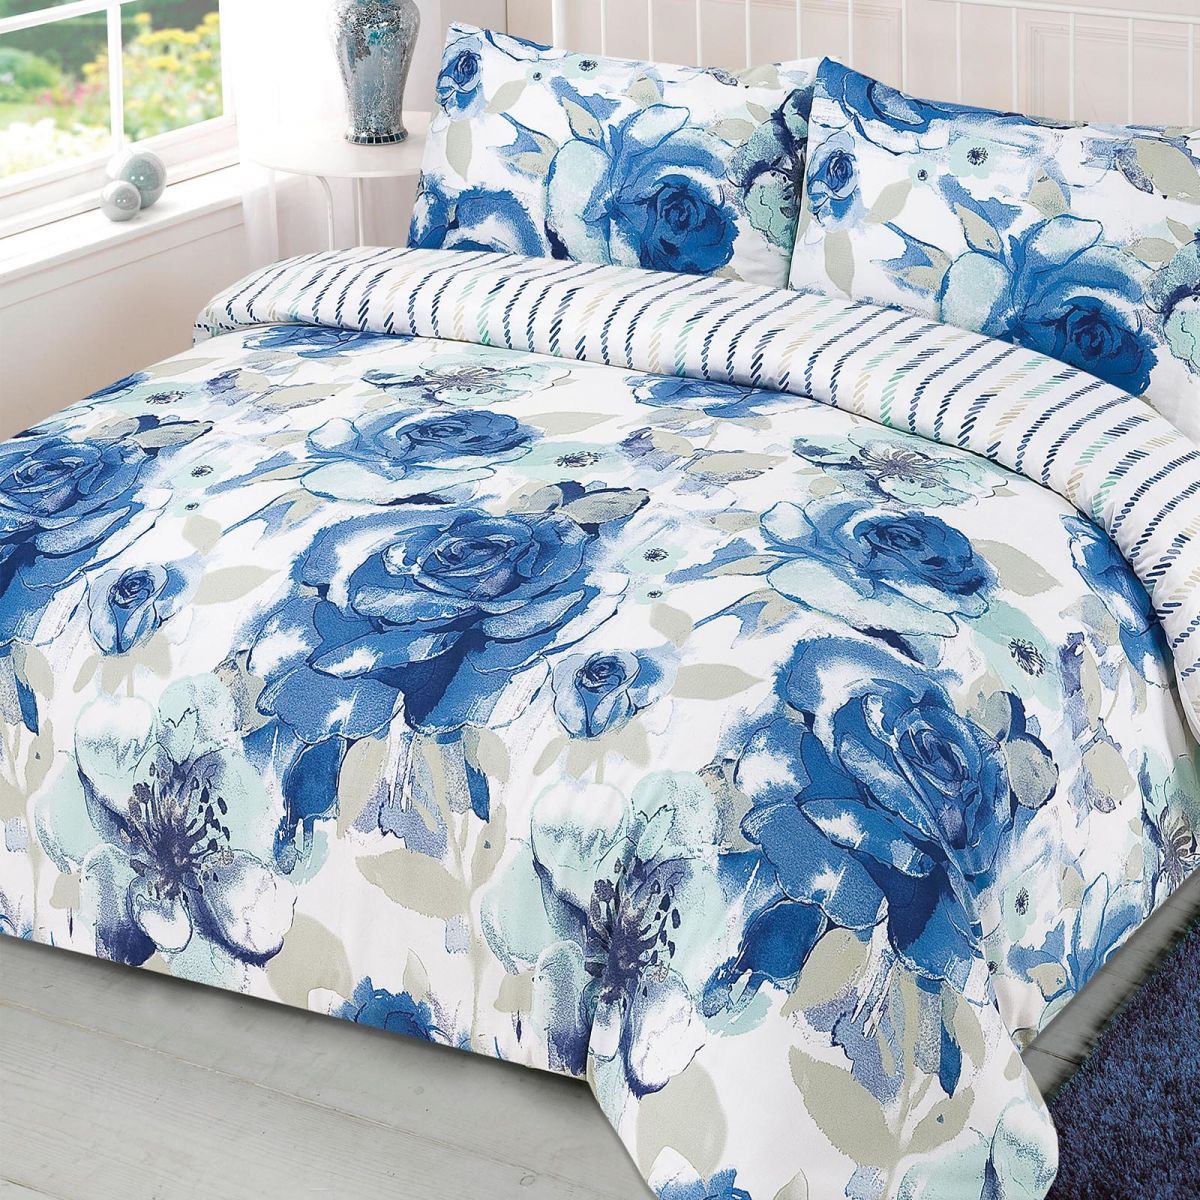 Floral Reversible King Size Cover With Pillowcase Set Blue/White